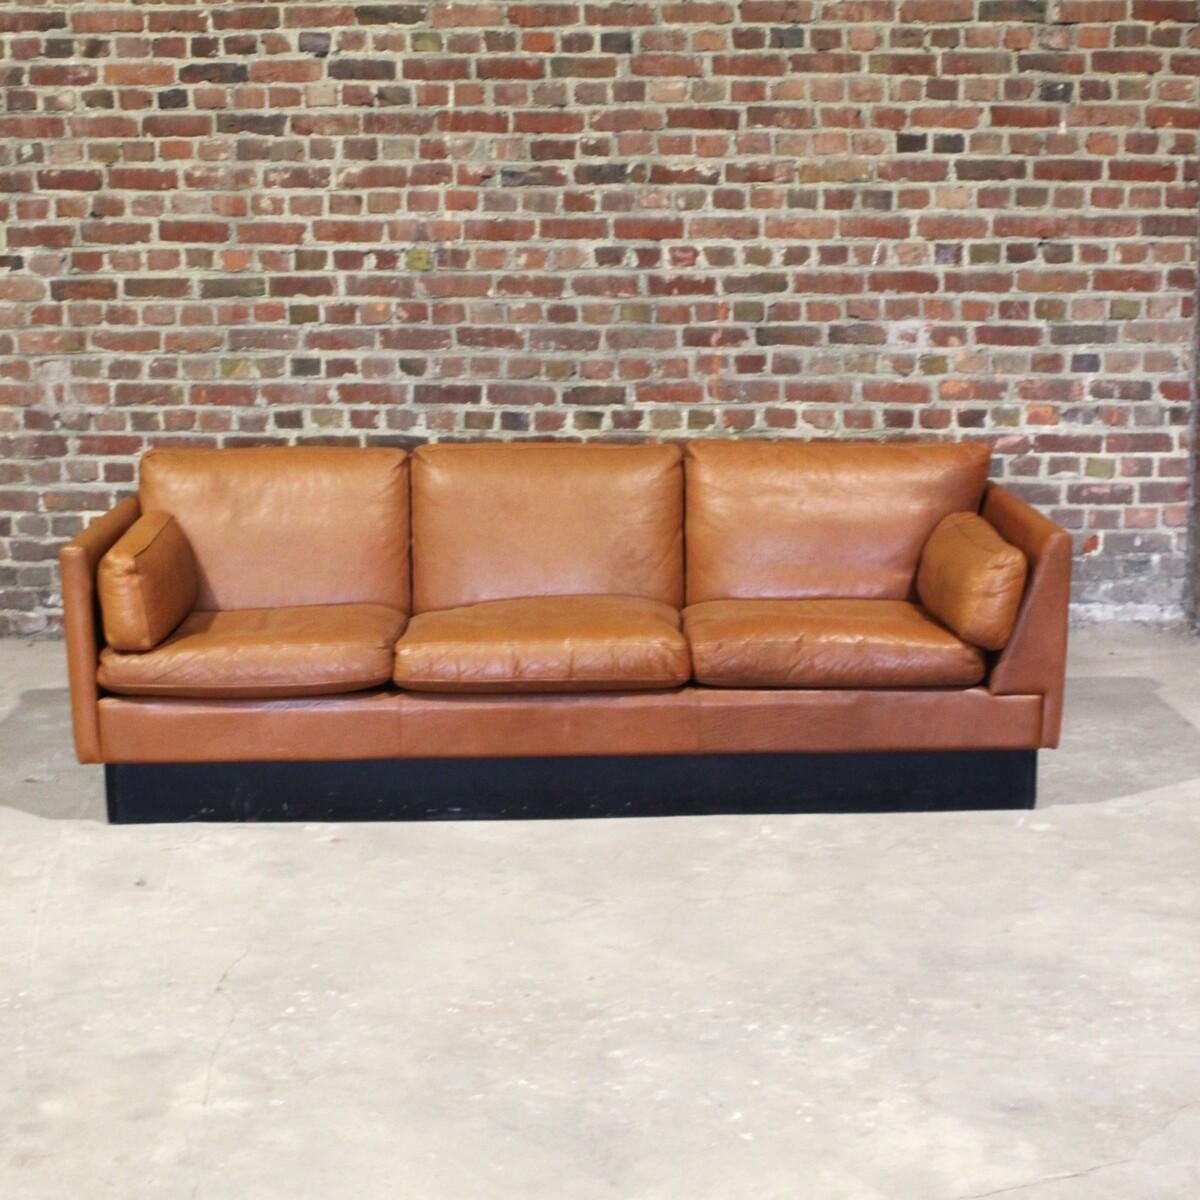 Very original asymmetrical sofa in brown leather. This beautifully patinated sofa rests on a blackened wooden base. The leather is thick and supple. Of Scandinavian origin, it has the interesting feature of being slightly asymmetrical in the